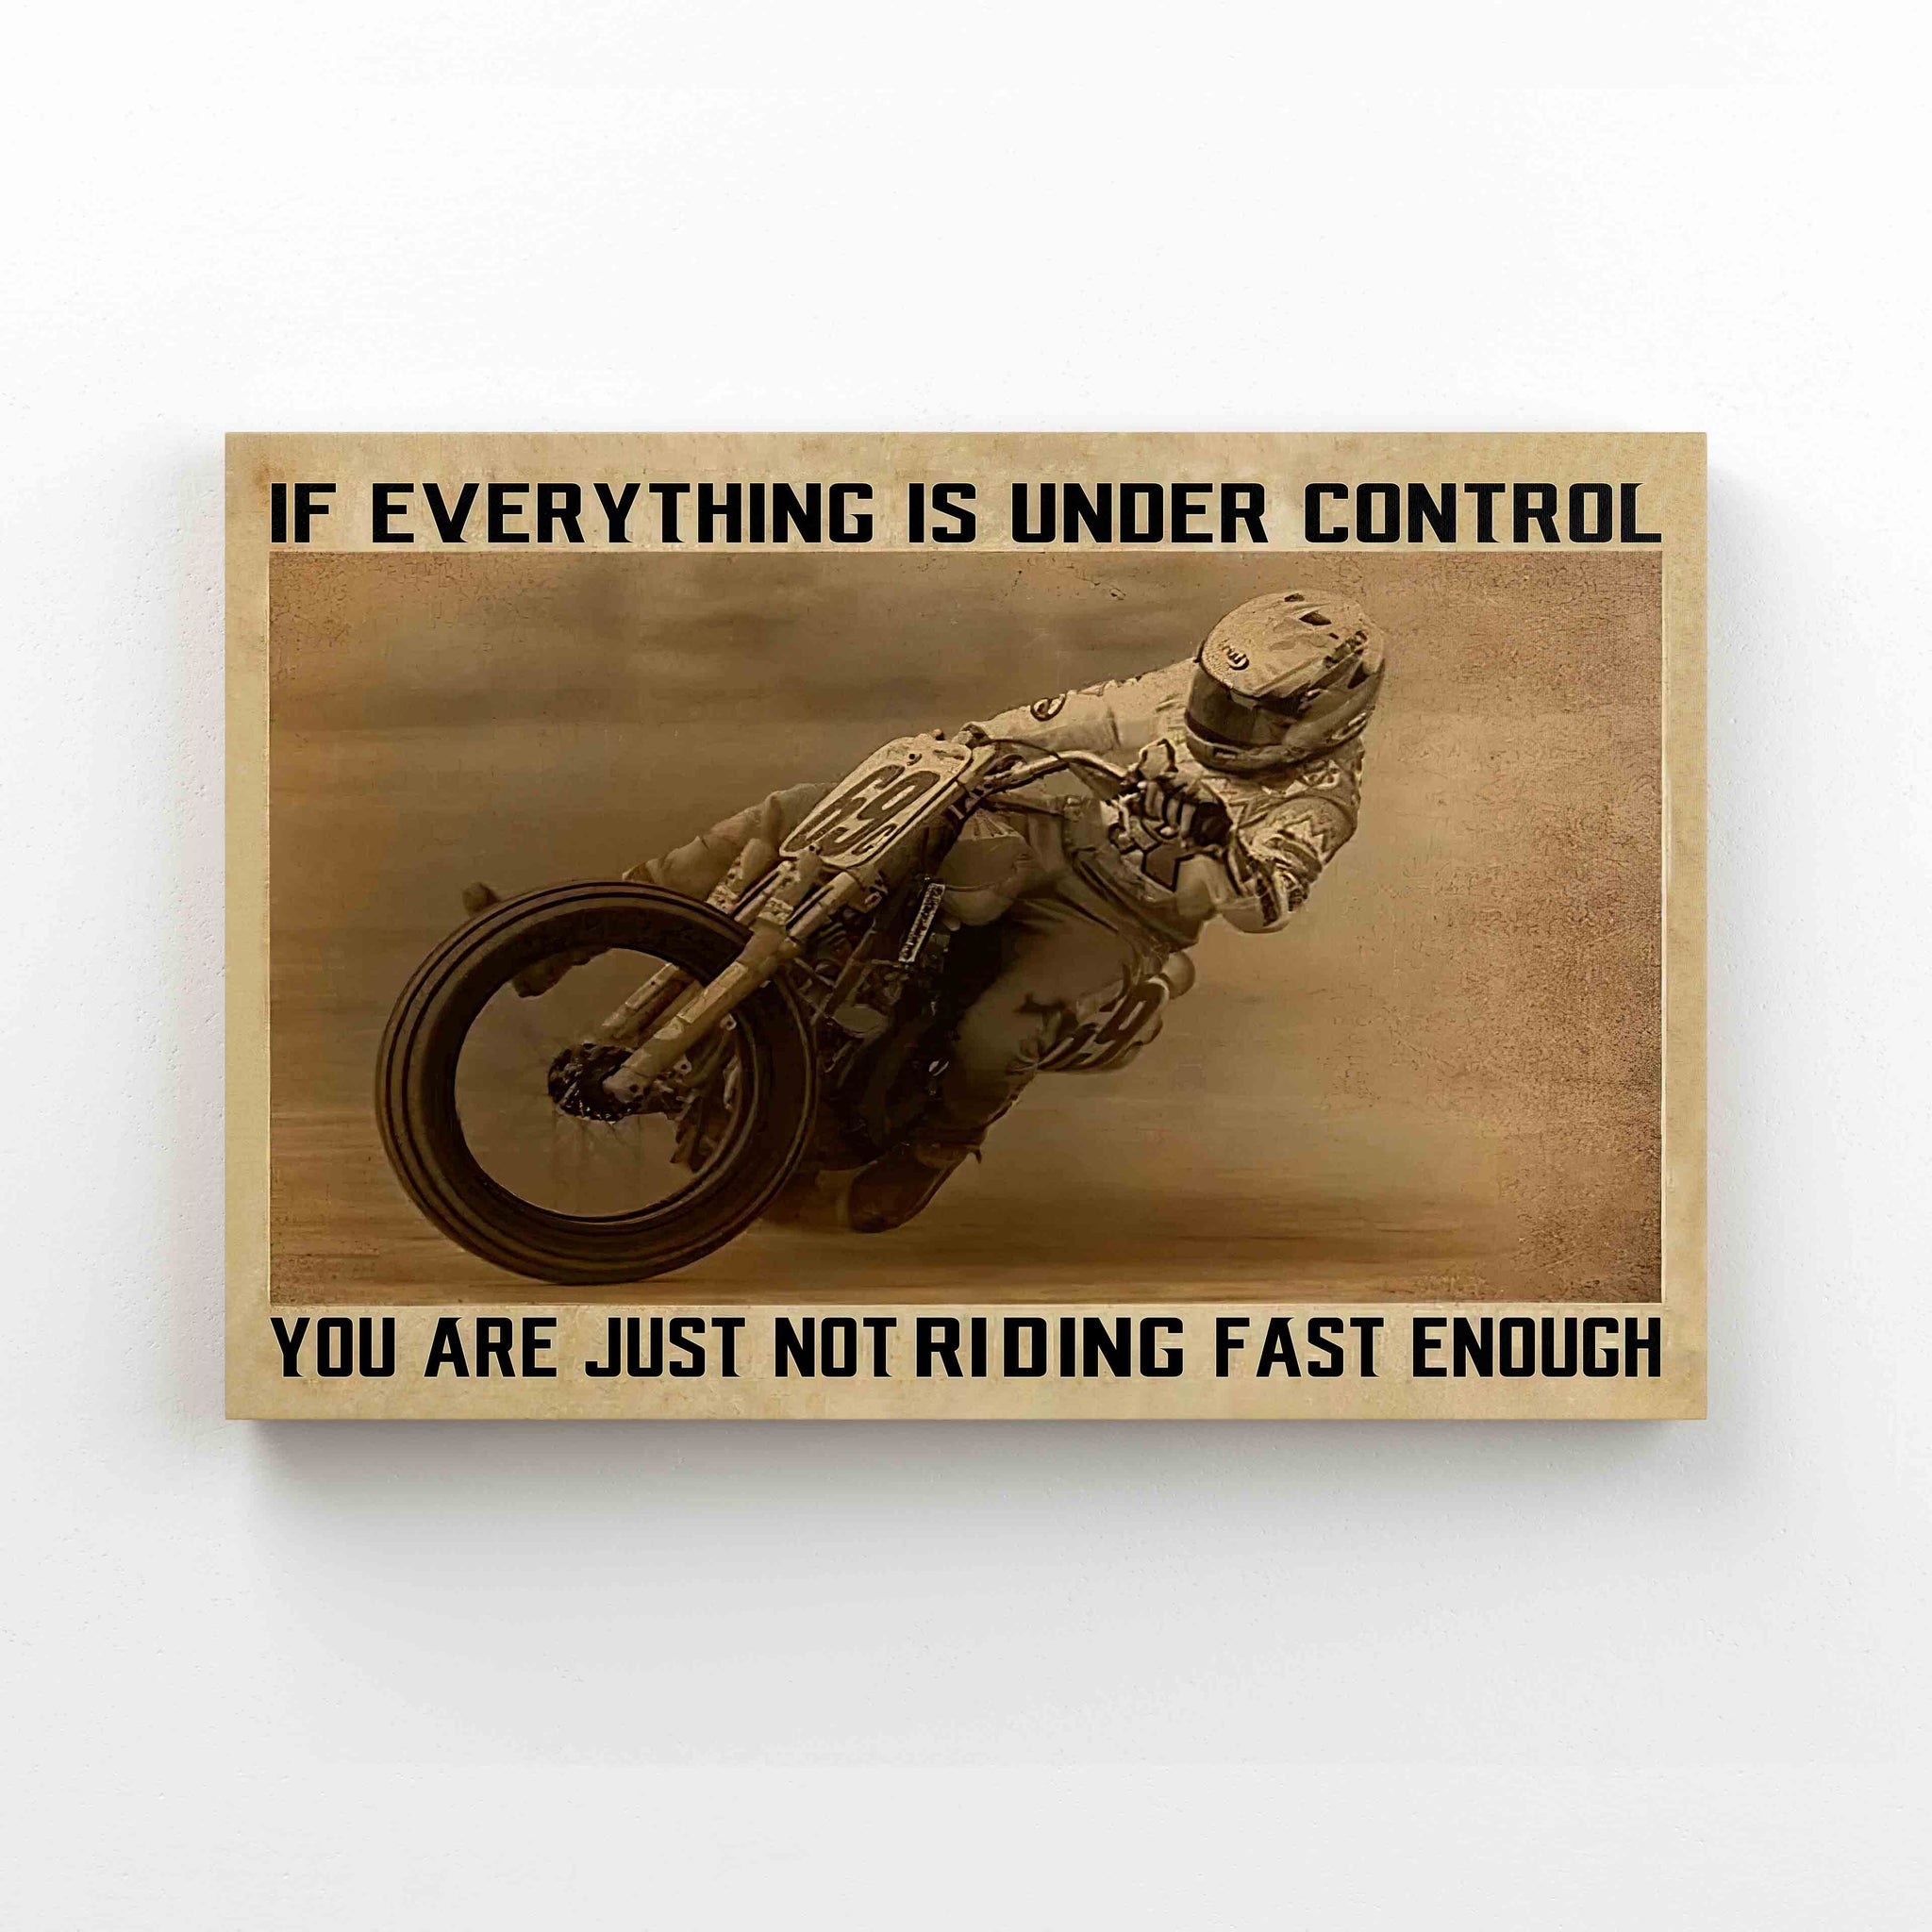 If Everything Is Under Control Canvas, Motorbike Canvas, Racer Canvas, Motor Racing Canvas, Canvas Wall Art, Canvas Prints